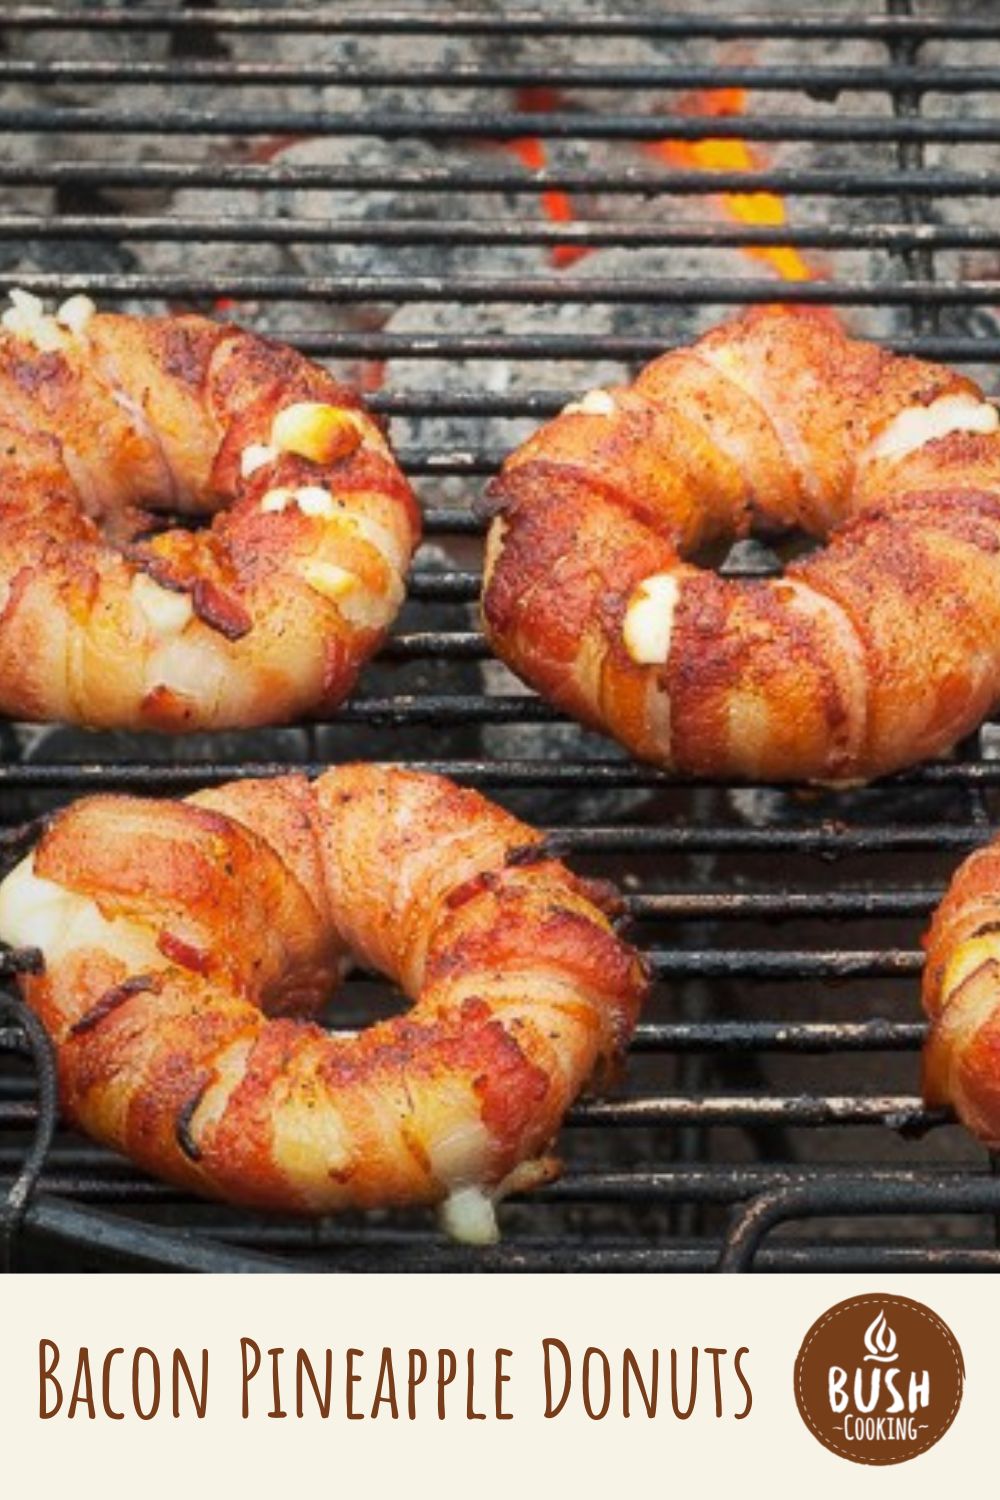 Bush Donuts Pineapple Cooking Bacon |